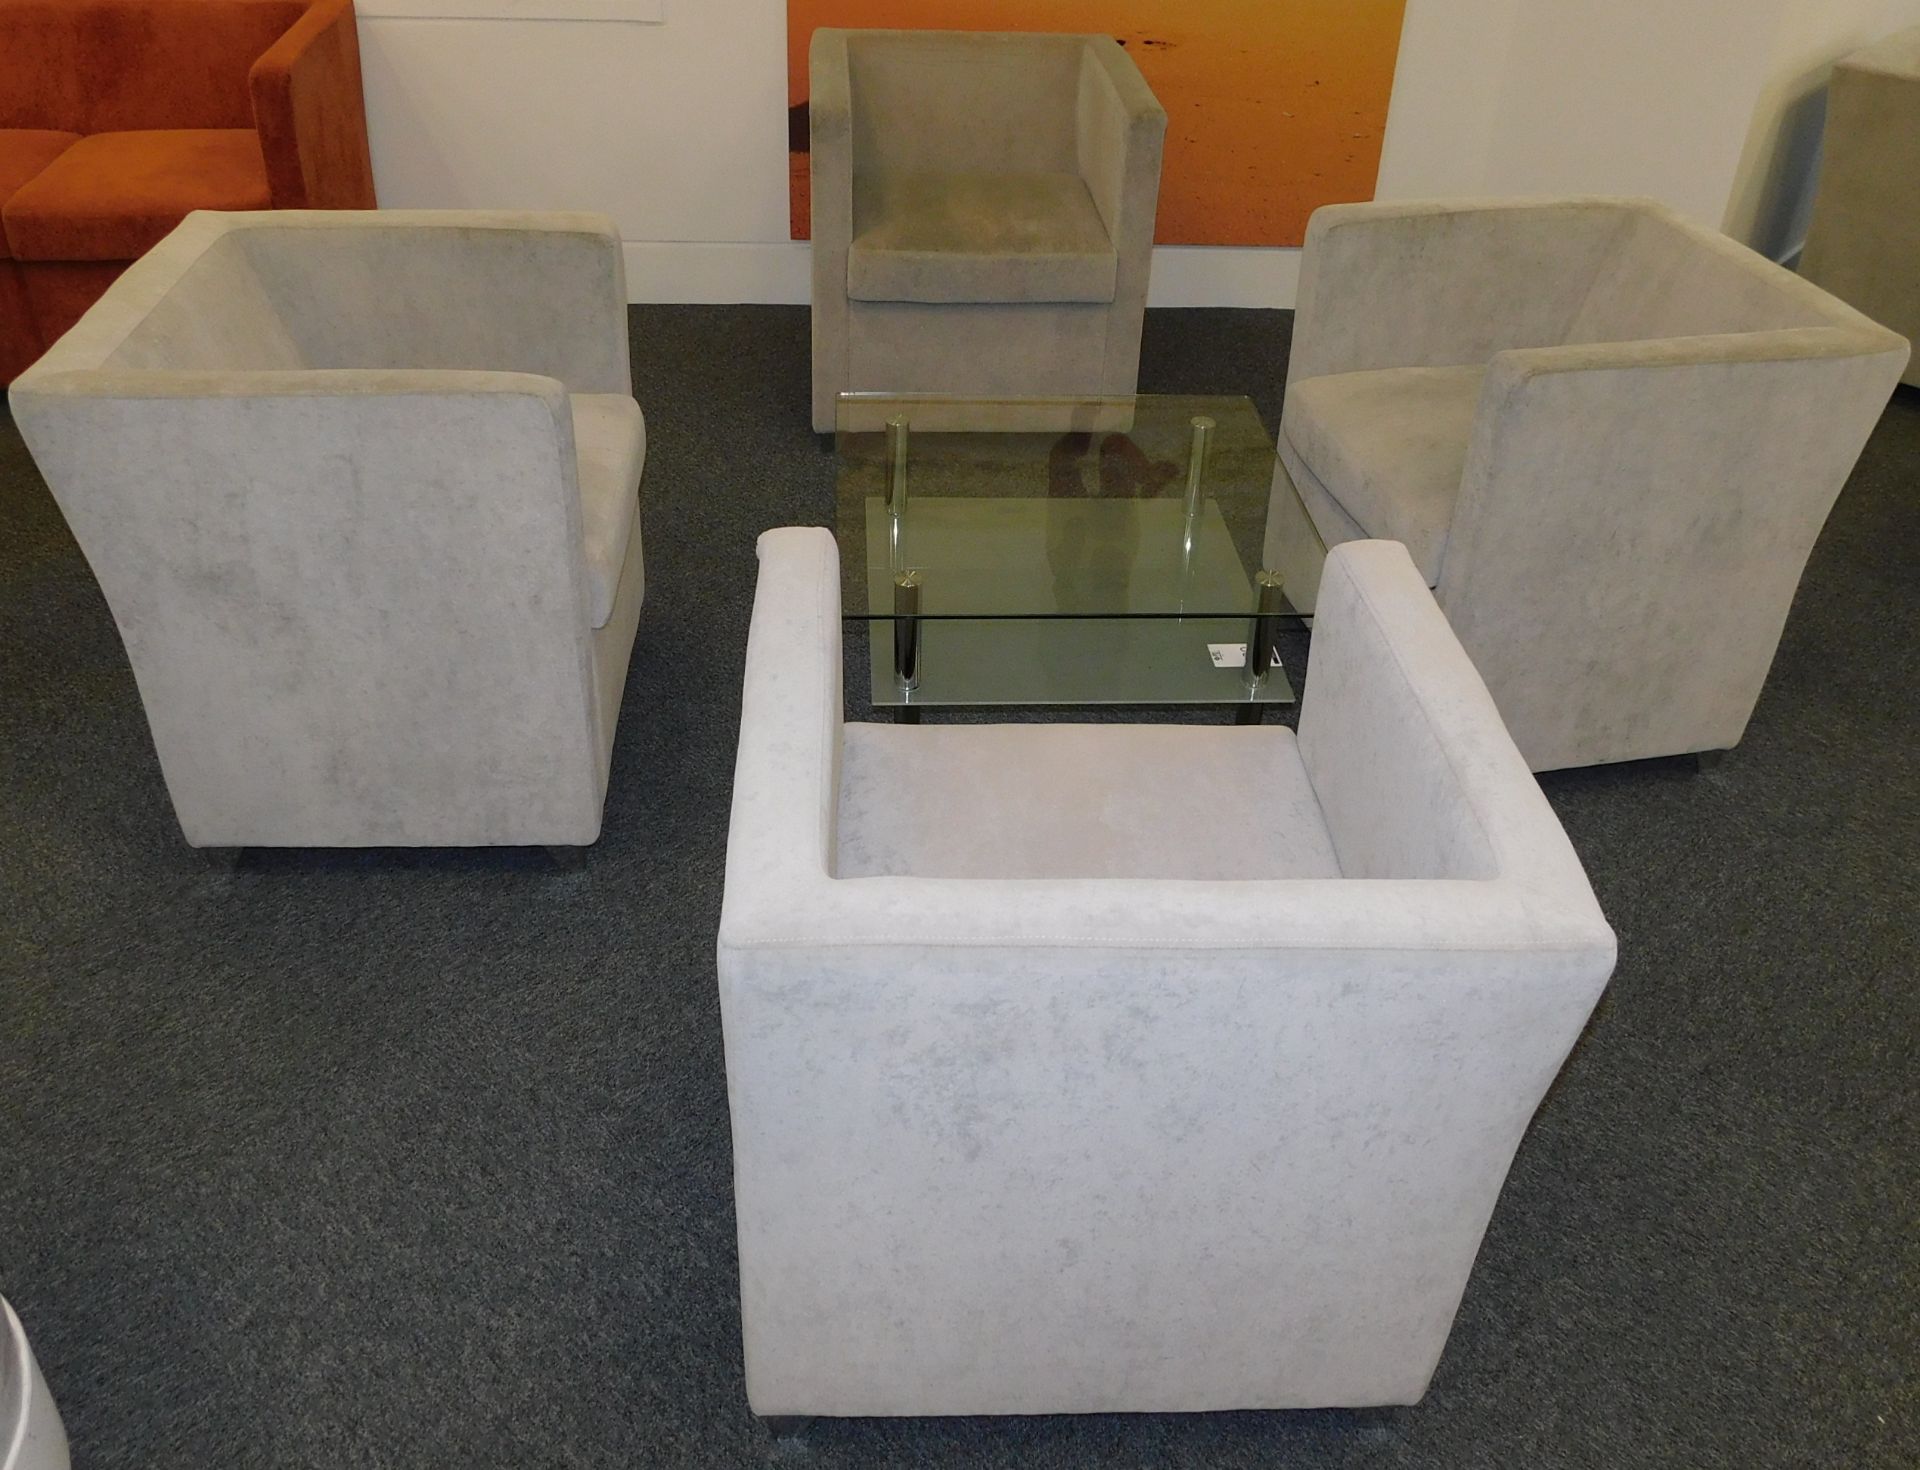 4 Jack Chairs with Glass Coffee Table (Located Stockport - See General Notes for More Details) - Image 2 of 2